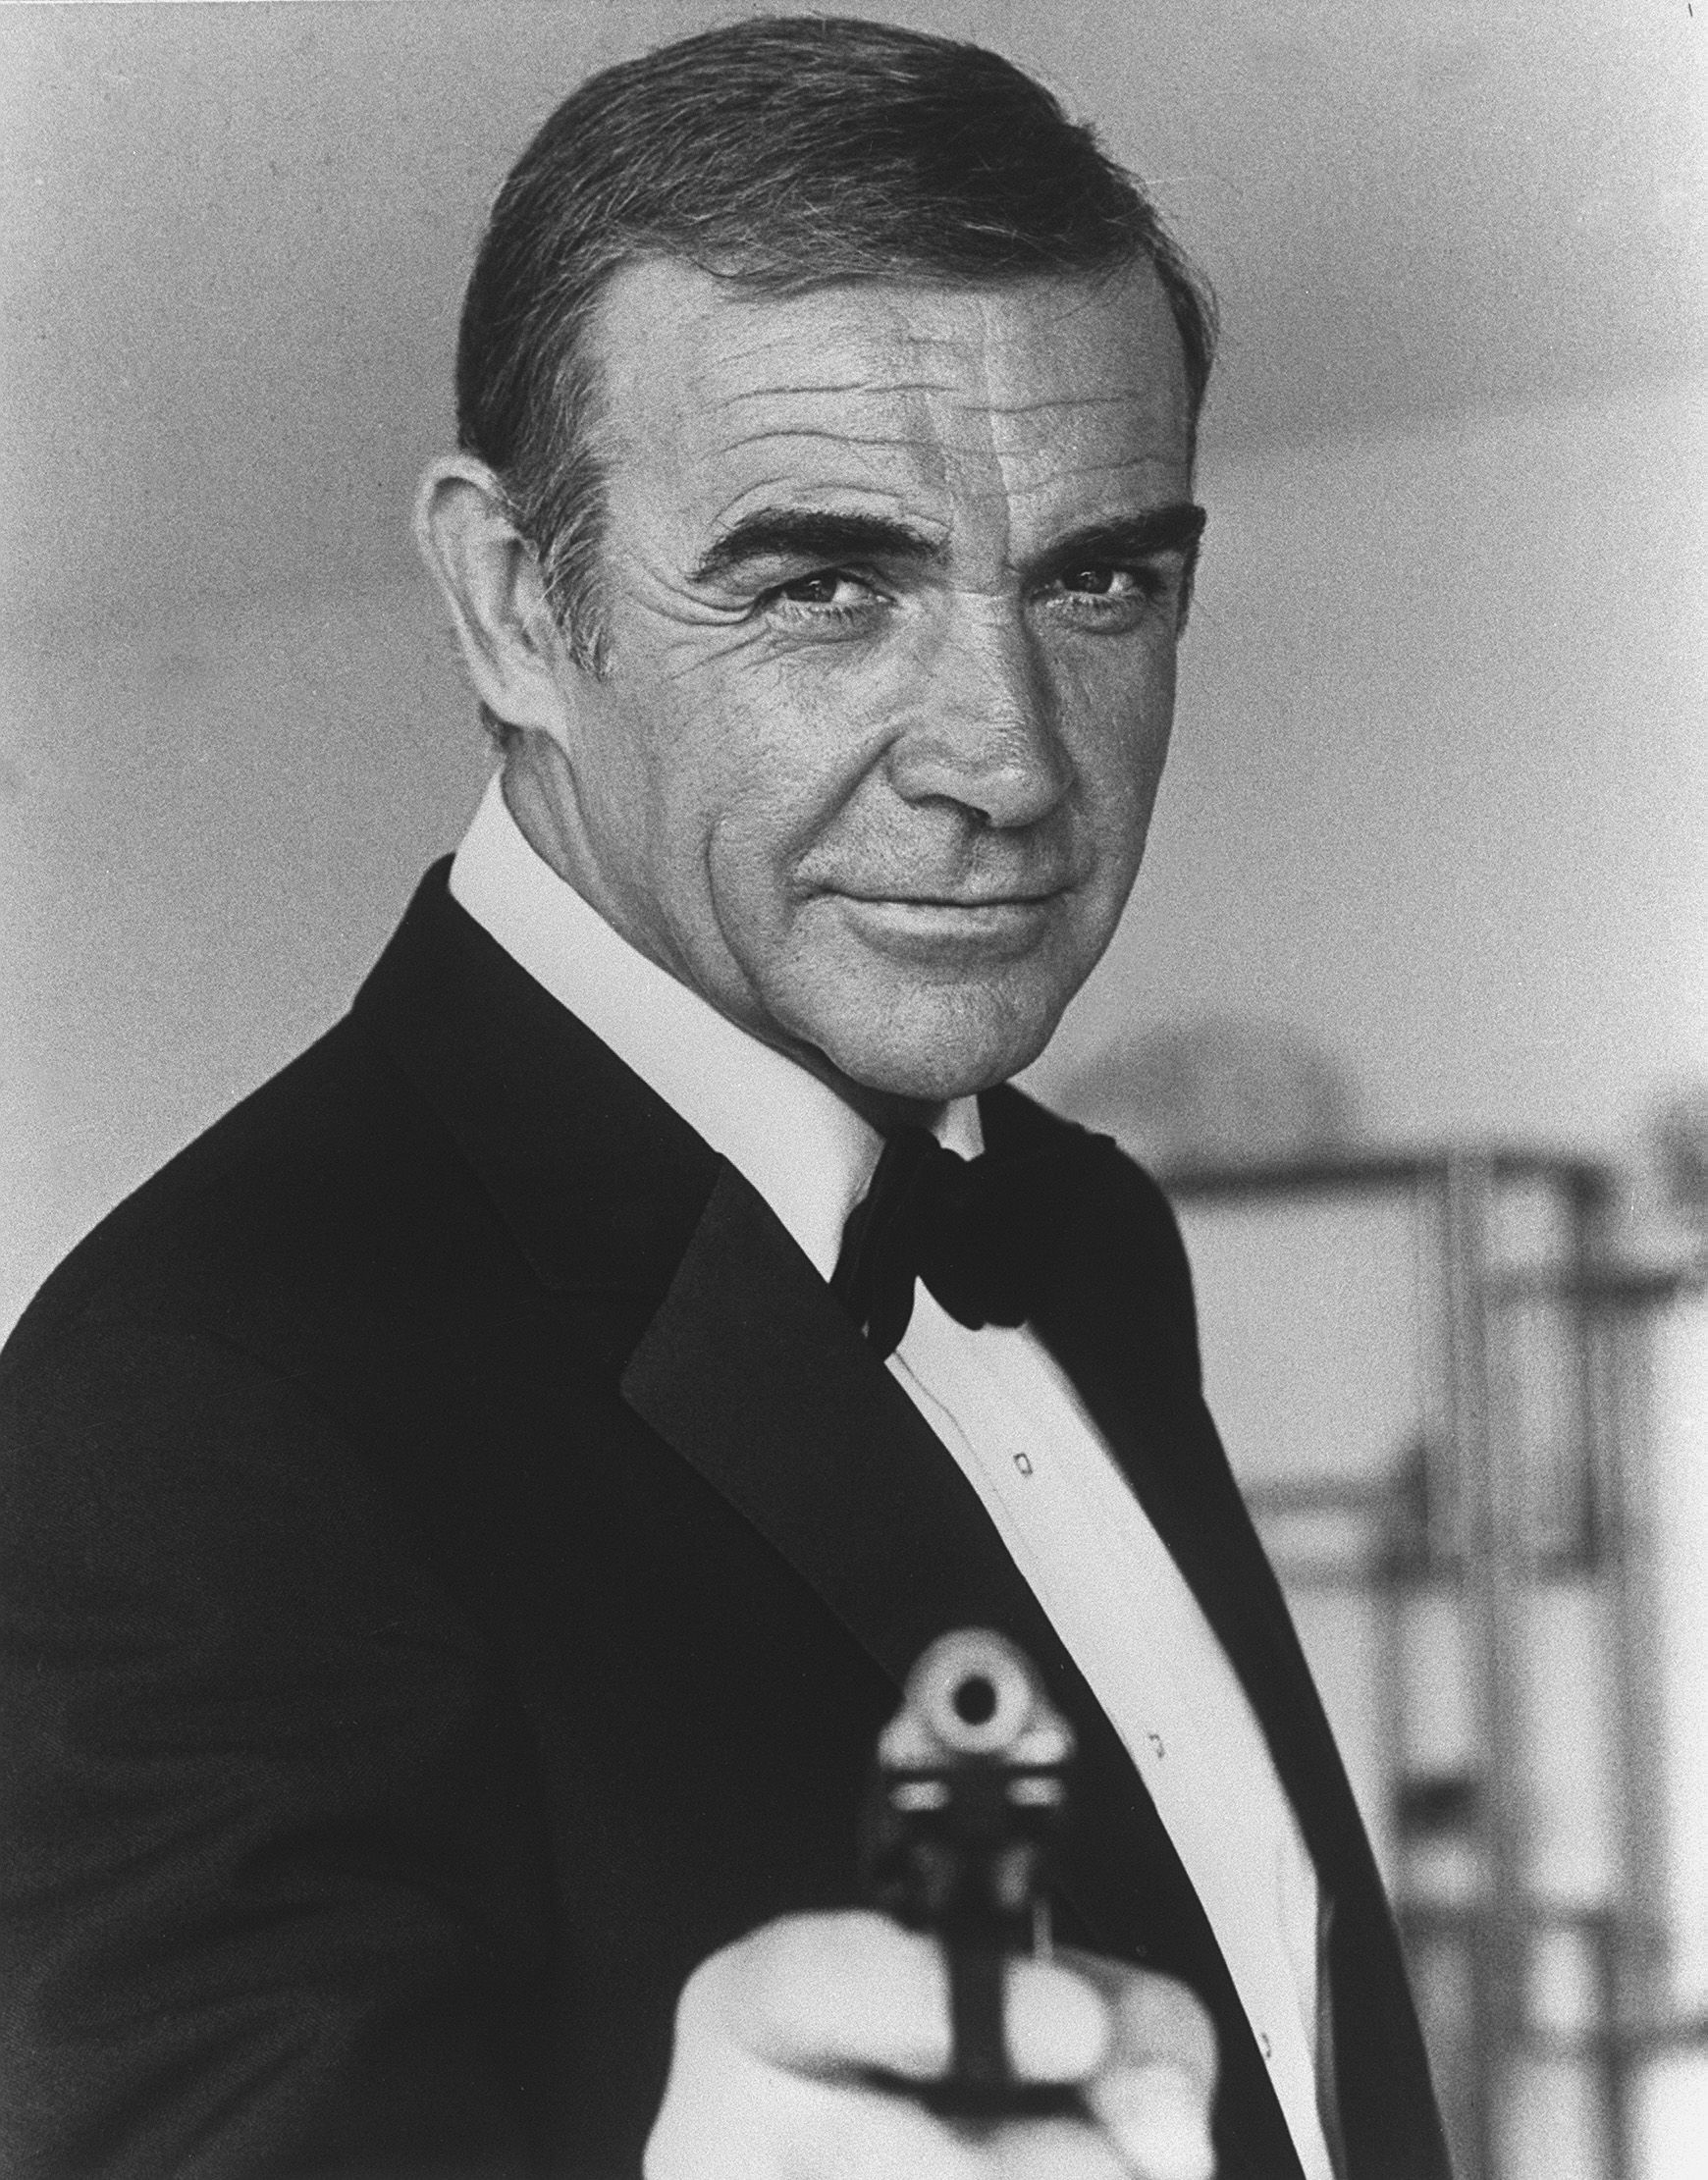 Walk down memory lane with some of Sean Connery’s classic roles